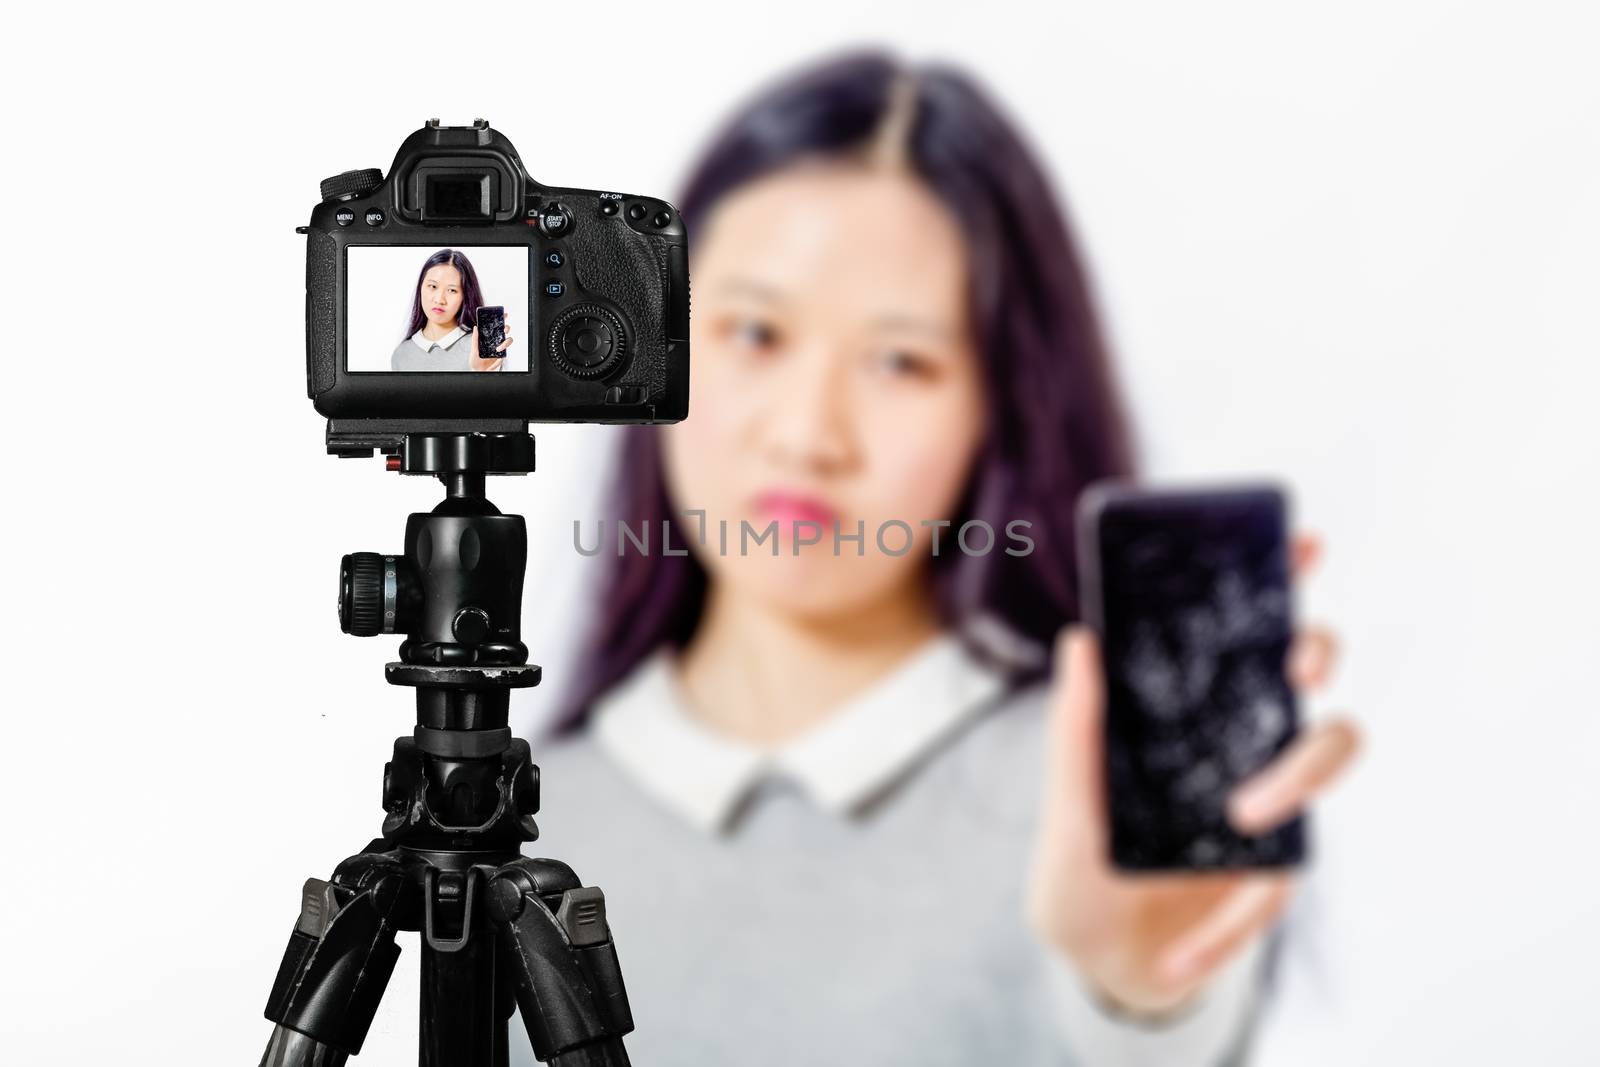 Focus on live view on camera on tripod, teenage girl  holds cracked phone image on back screen with blurred scene in background. Teenage vlogger livestreaming show concept